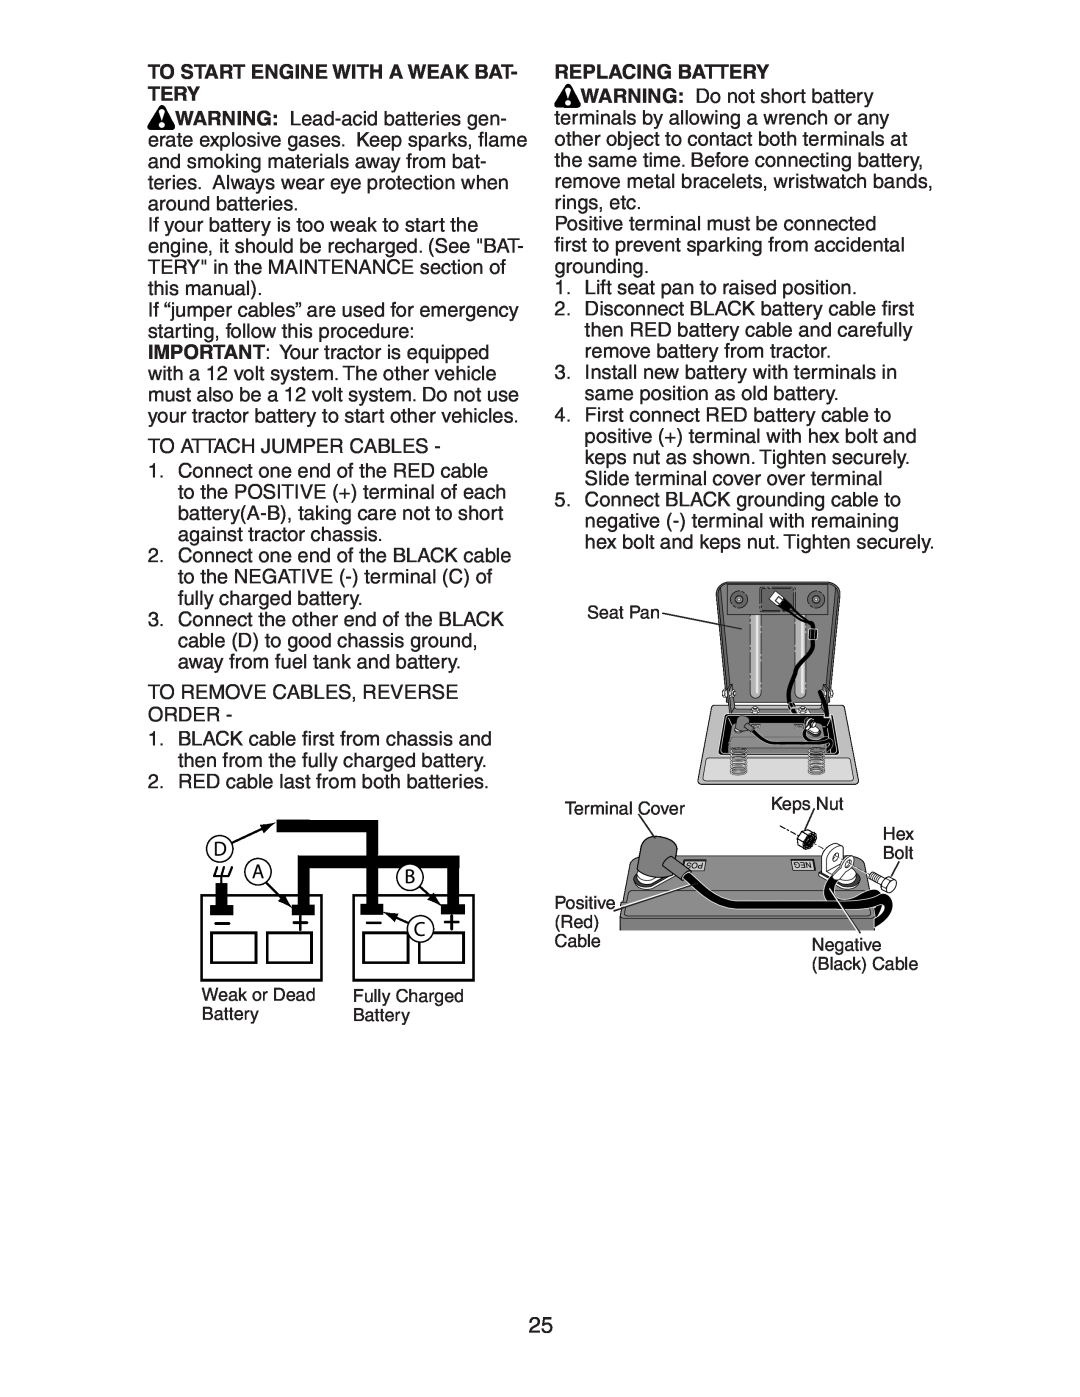 Electrolux AG15538A manual To Start Engine With A Weak Bat- Tery, Replacing Battery 